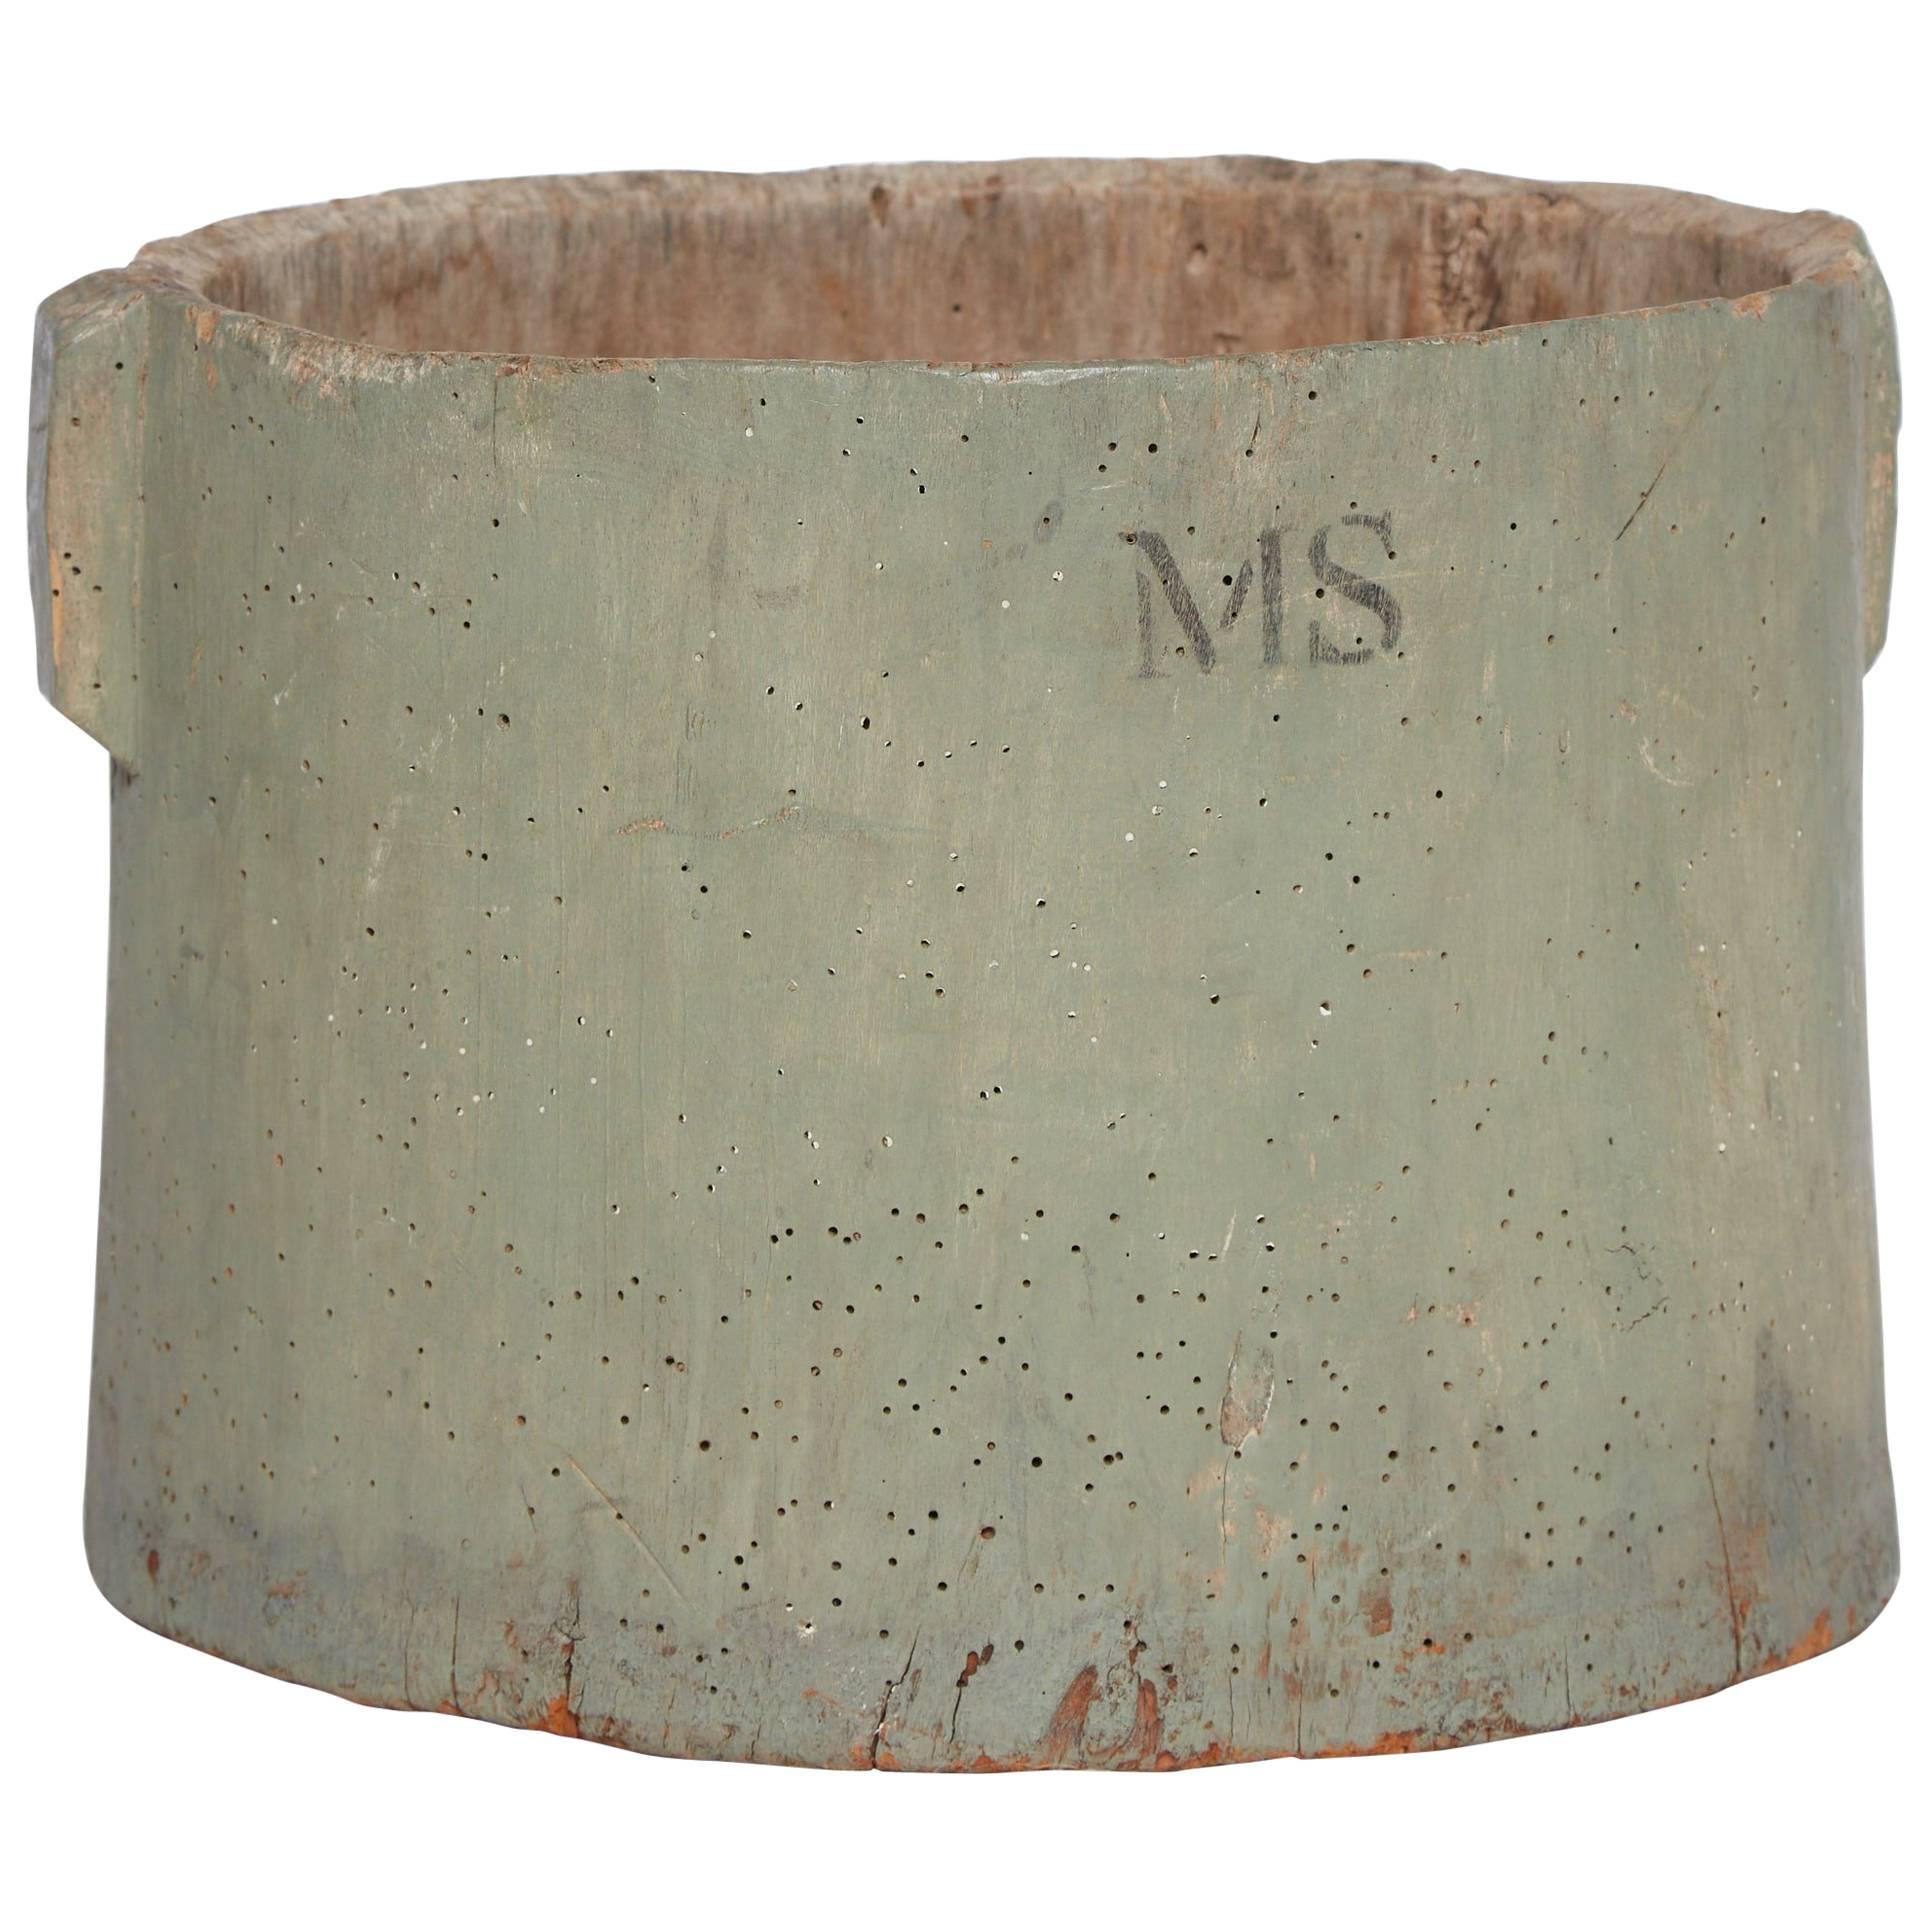 Early 20th Century American Stamped 'MS' Wooden Vessel with Two Handles